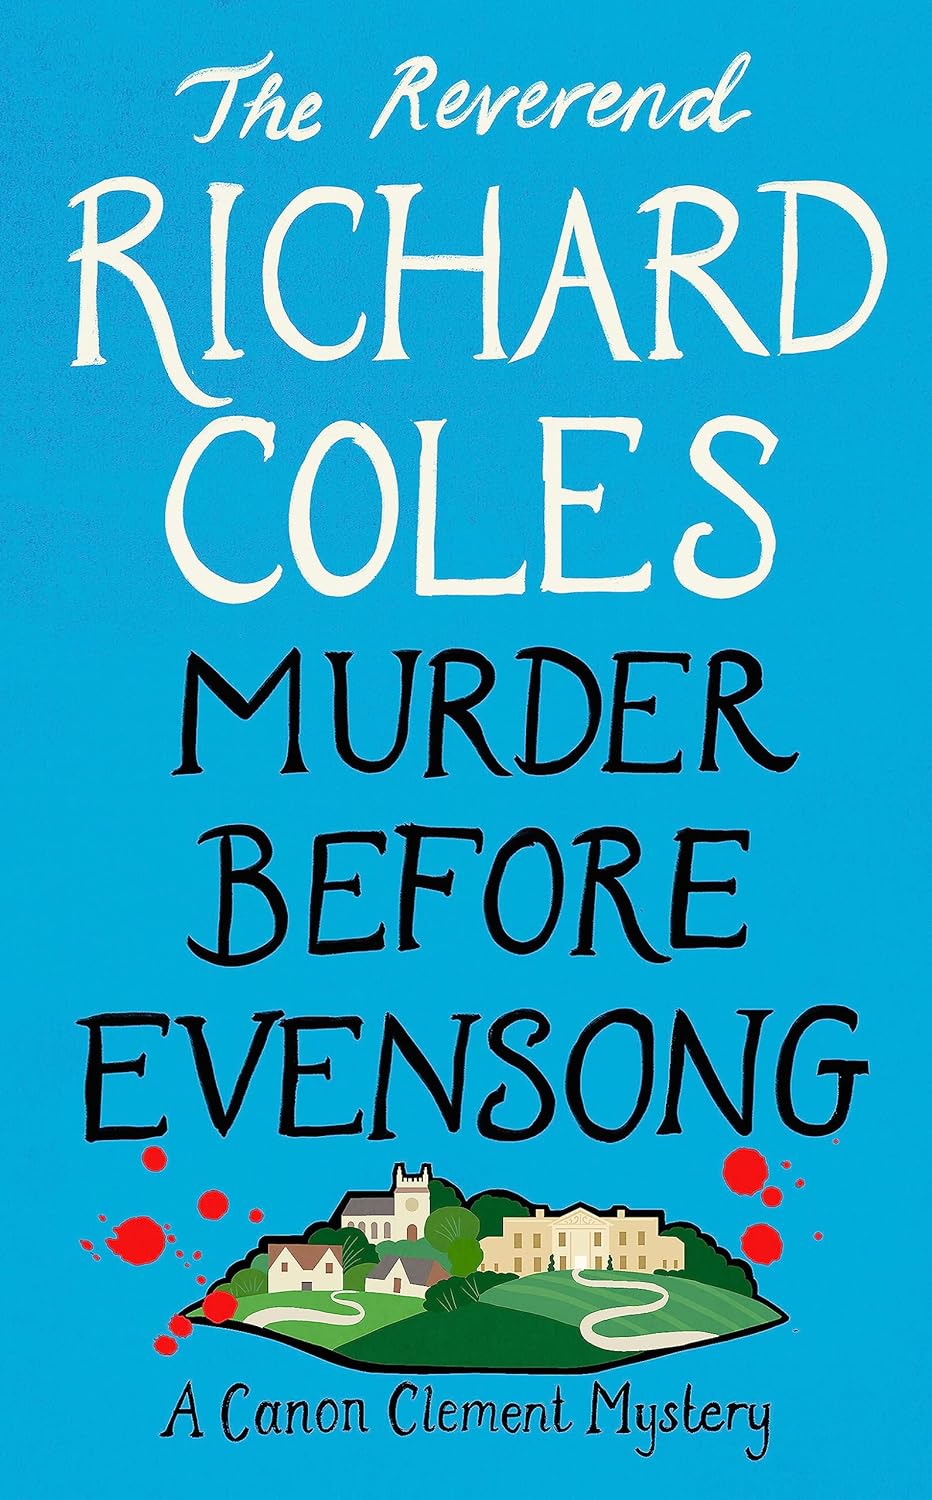 Murder Before Evensong: A Canon Clement Mystery